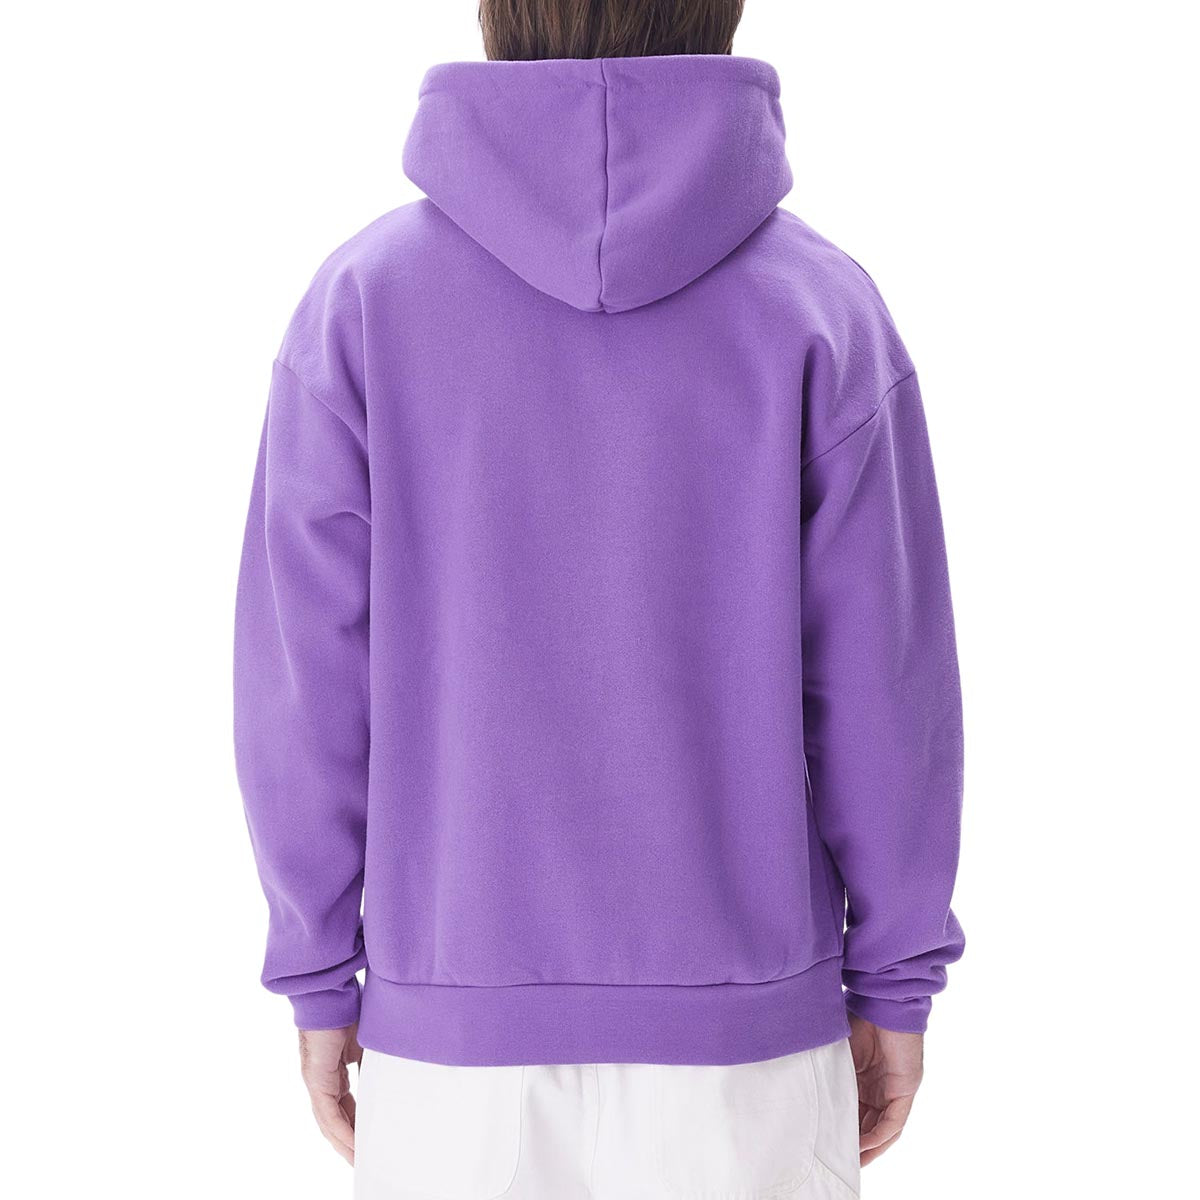 Obey Tbd Hoodie - Passion Flower image 4